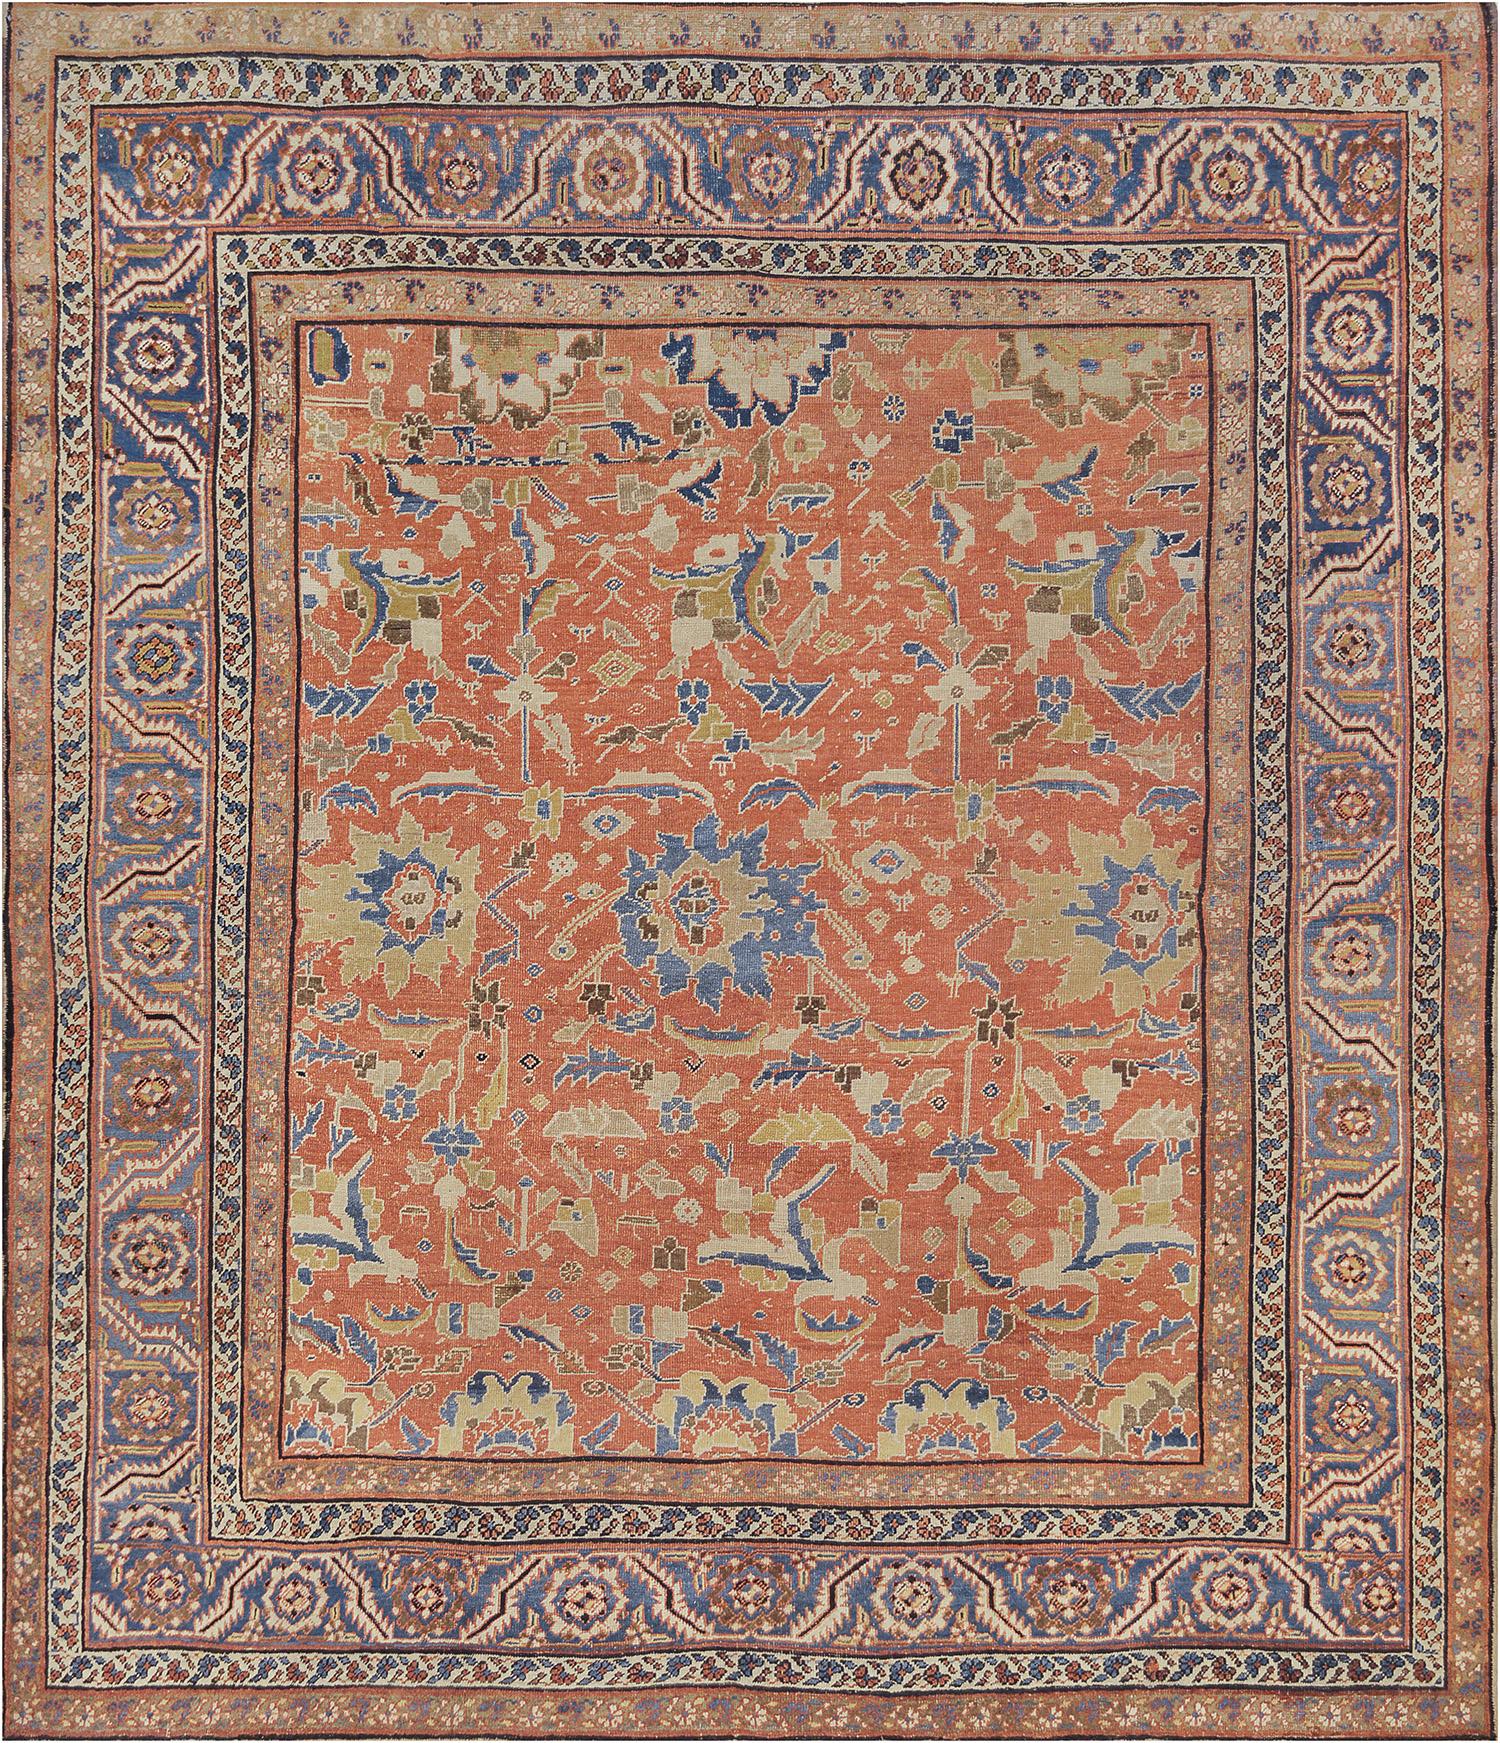 Hand-Woven Late 19th Century Bakhshaish Rug from North West Persia For Sale